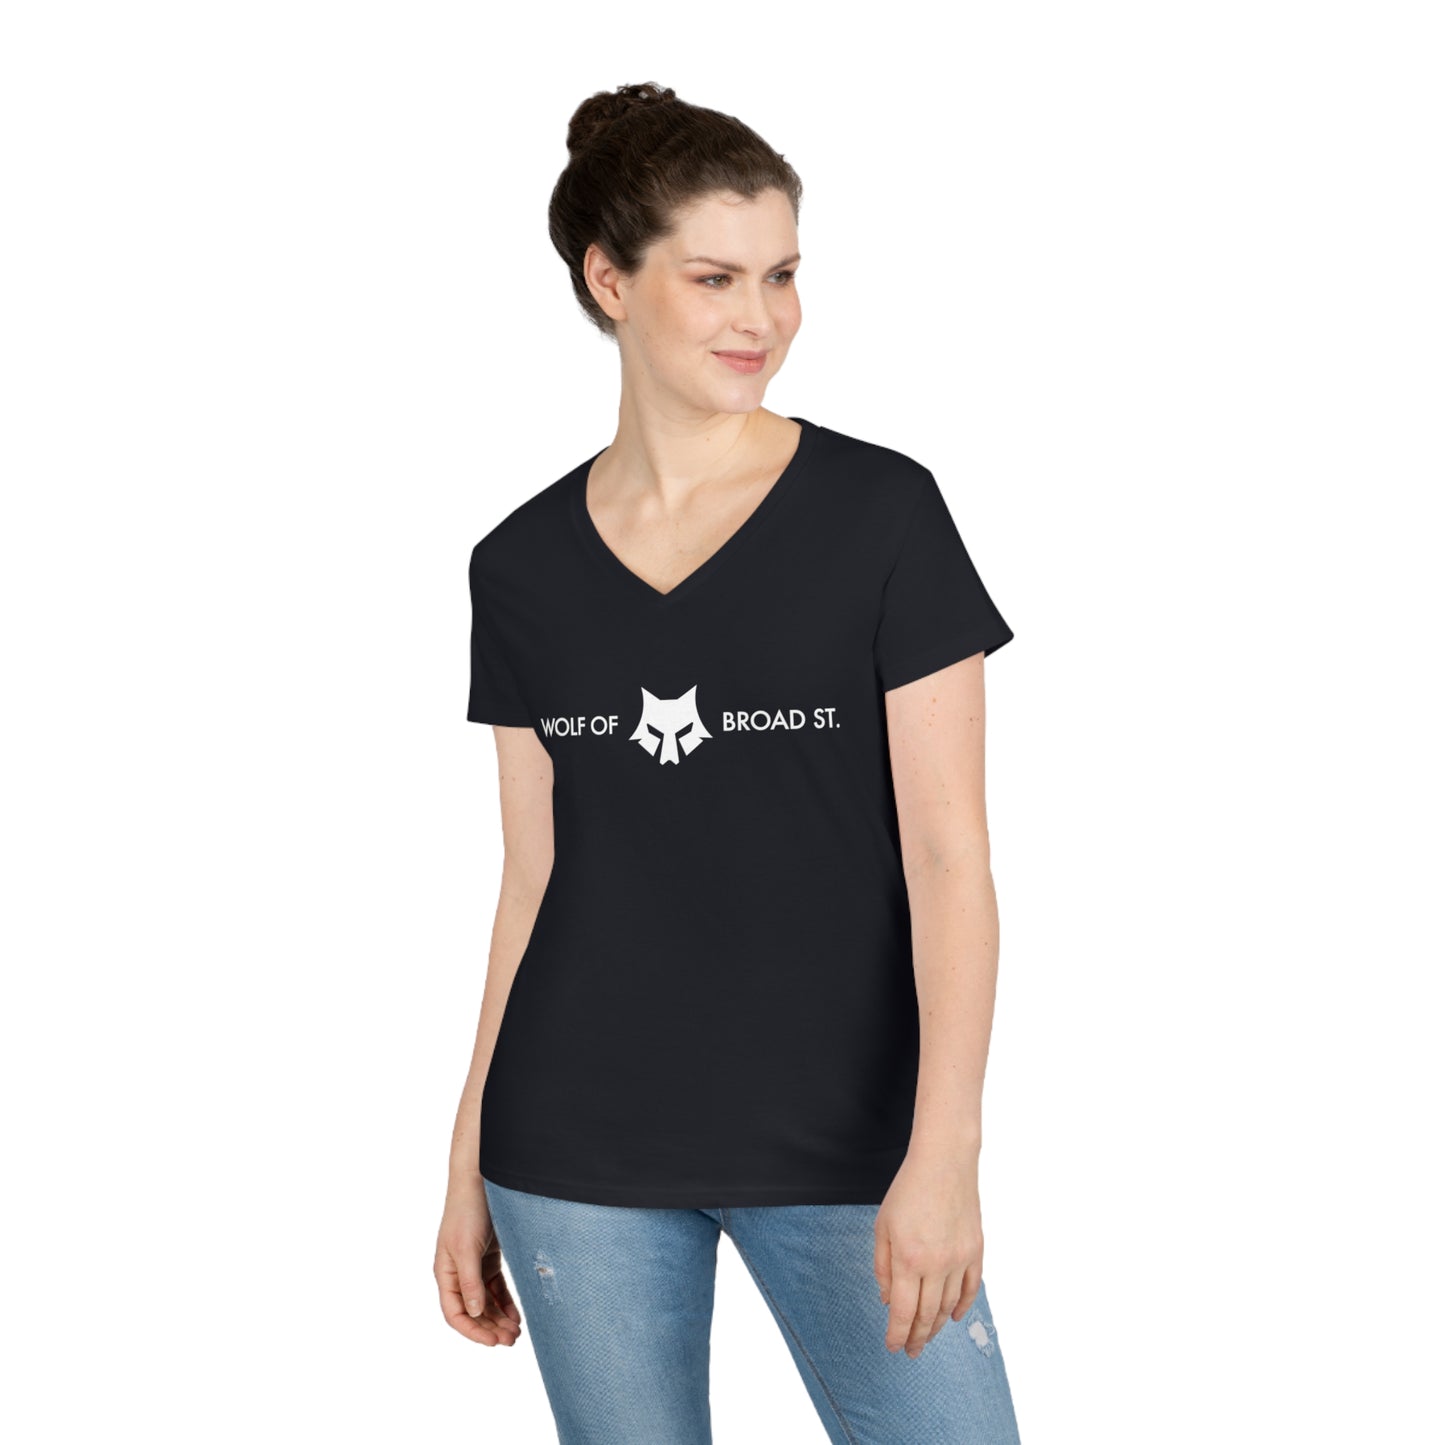 Women's Wolf of Broad Street "Power Moves Only" V-Neck Black Tee